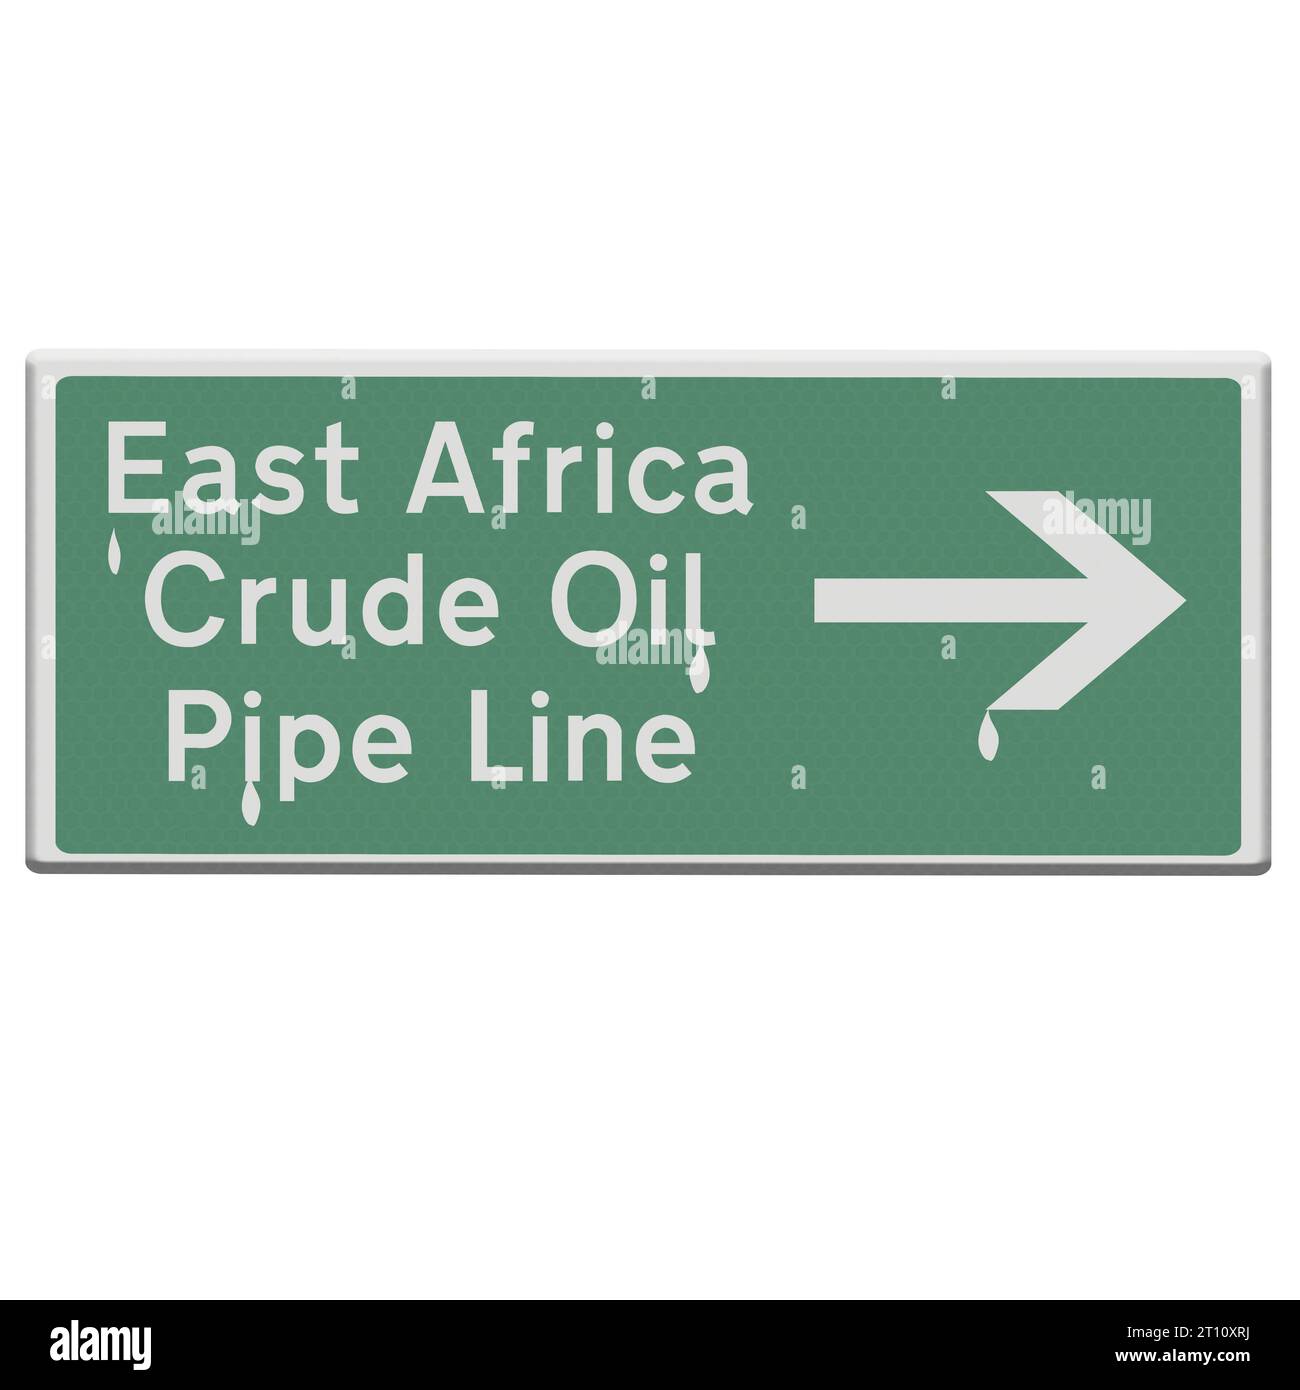 Illustration: Cartoon Road sign pointing towards the East Africa Crude Oil Pipe Line. EACOP. The East Africa Crude Oil Pipe Line is planned to pass through Uganda and Tanzania to the Indian Ocean at Tanga. The plan is controversial with campaigners against the project saying it will create great environmental risk at a time of climate change whilst agreements are being made to reduce carbon emissions. Illustration: Cartoon-Straßenschild in Richtung der Rohölpipeline Ostafrikas. EACOP. Die Ostafrika-Rohölpipeline soll durch Uganda und Tansania zum Indischen Ozean bei Tanga führen. Der Plan ist Stock Photo